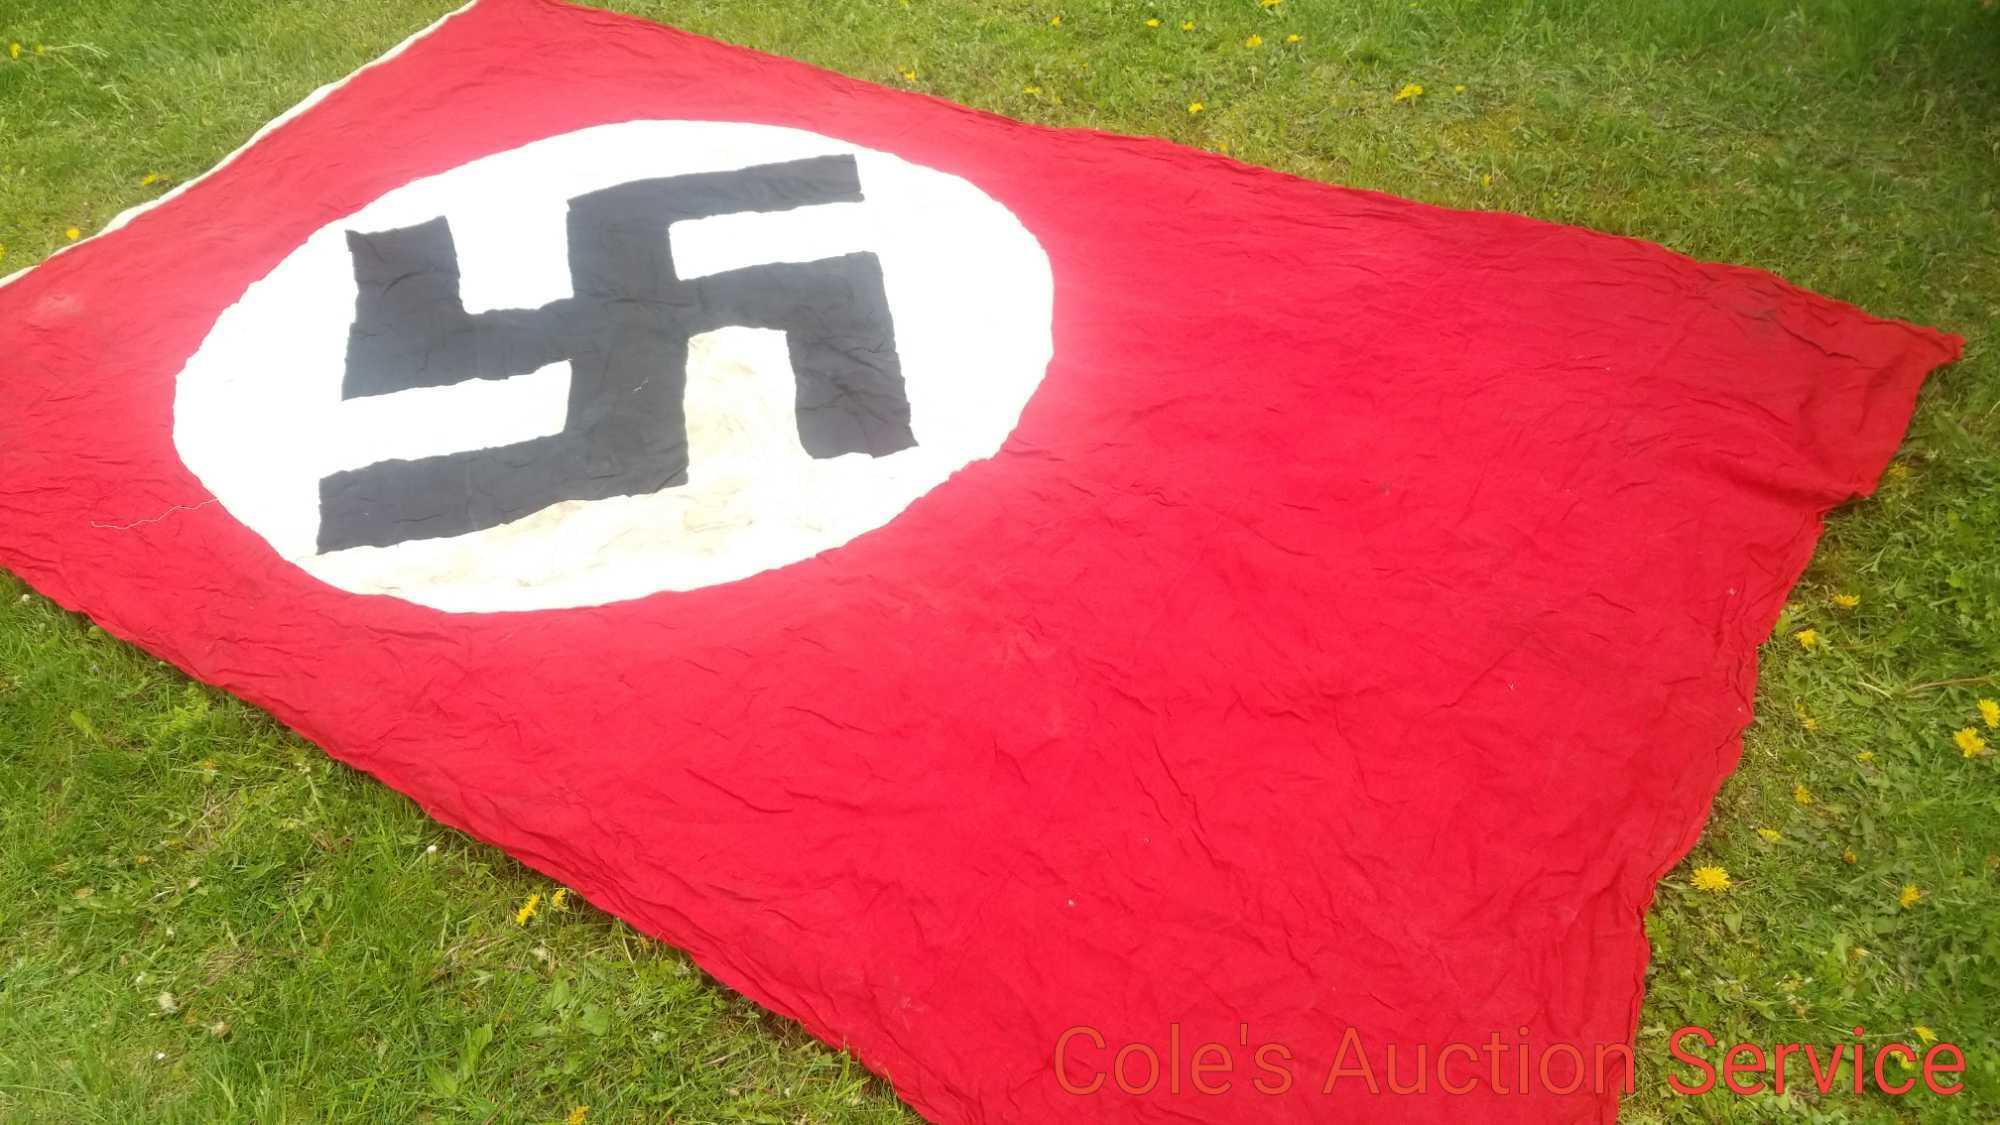 Large German Nazi flag measures 9 ft by 6 ft. See photos for details as it looks to be in very good